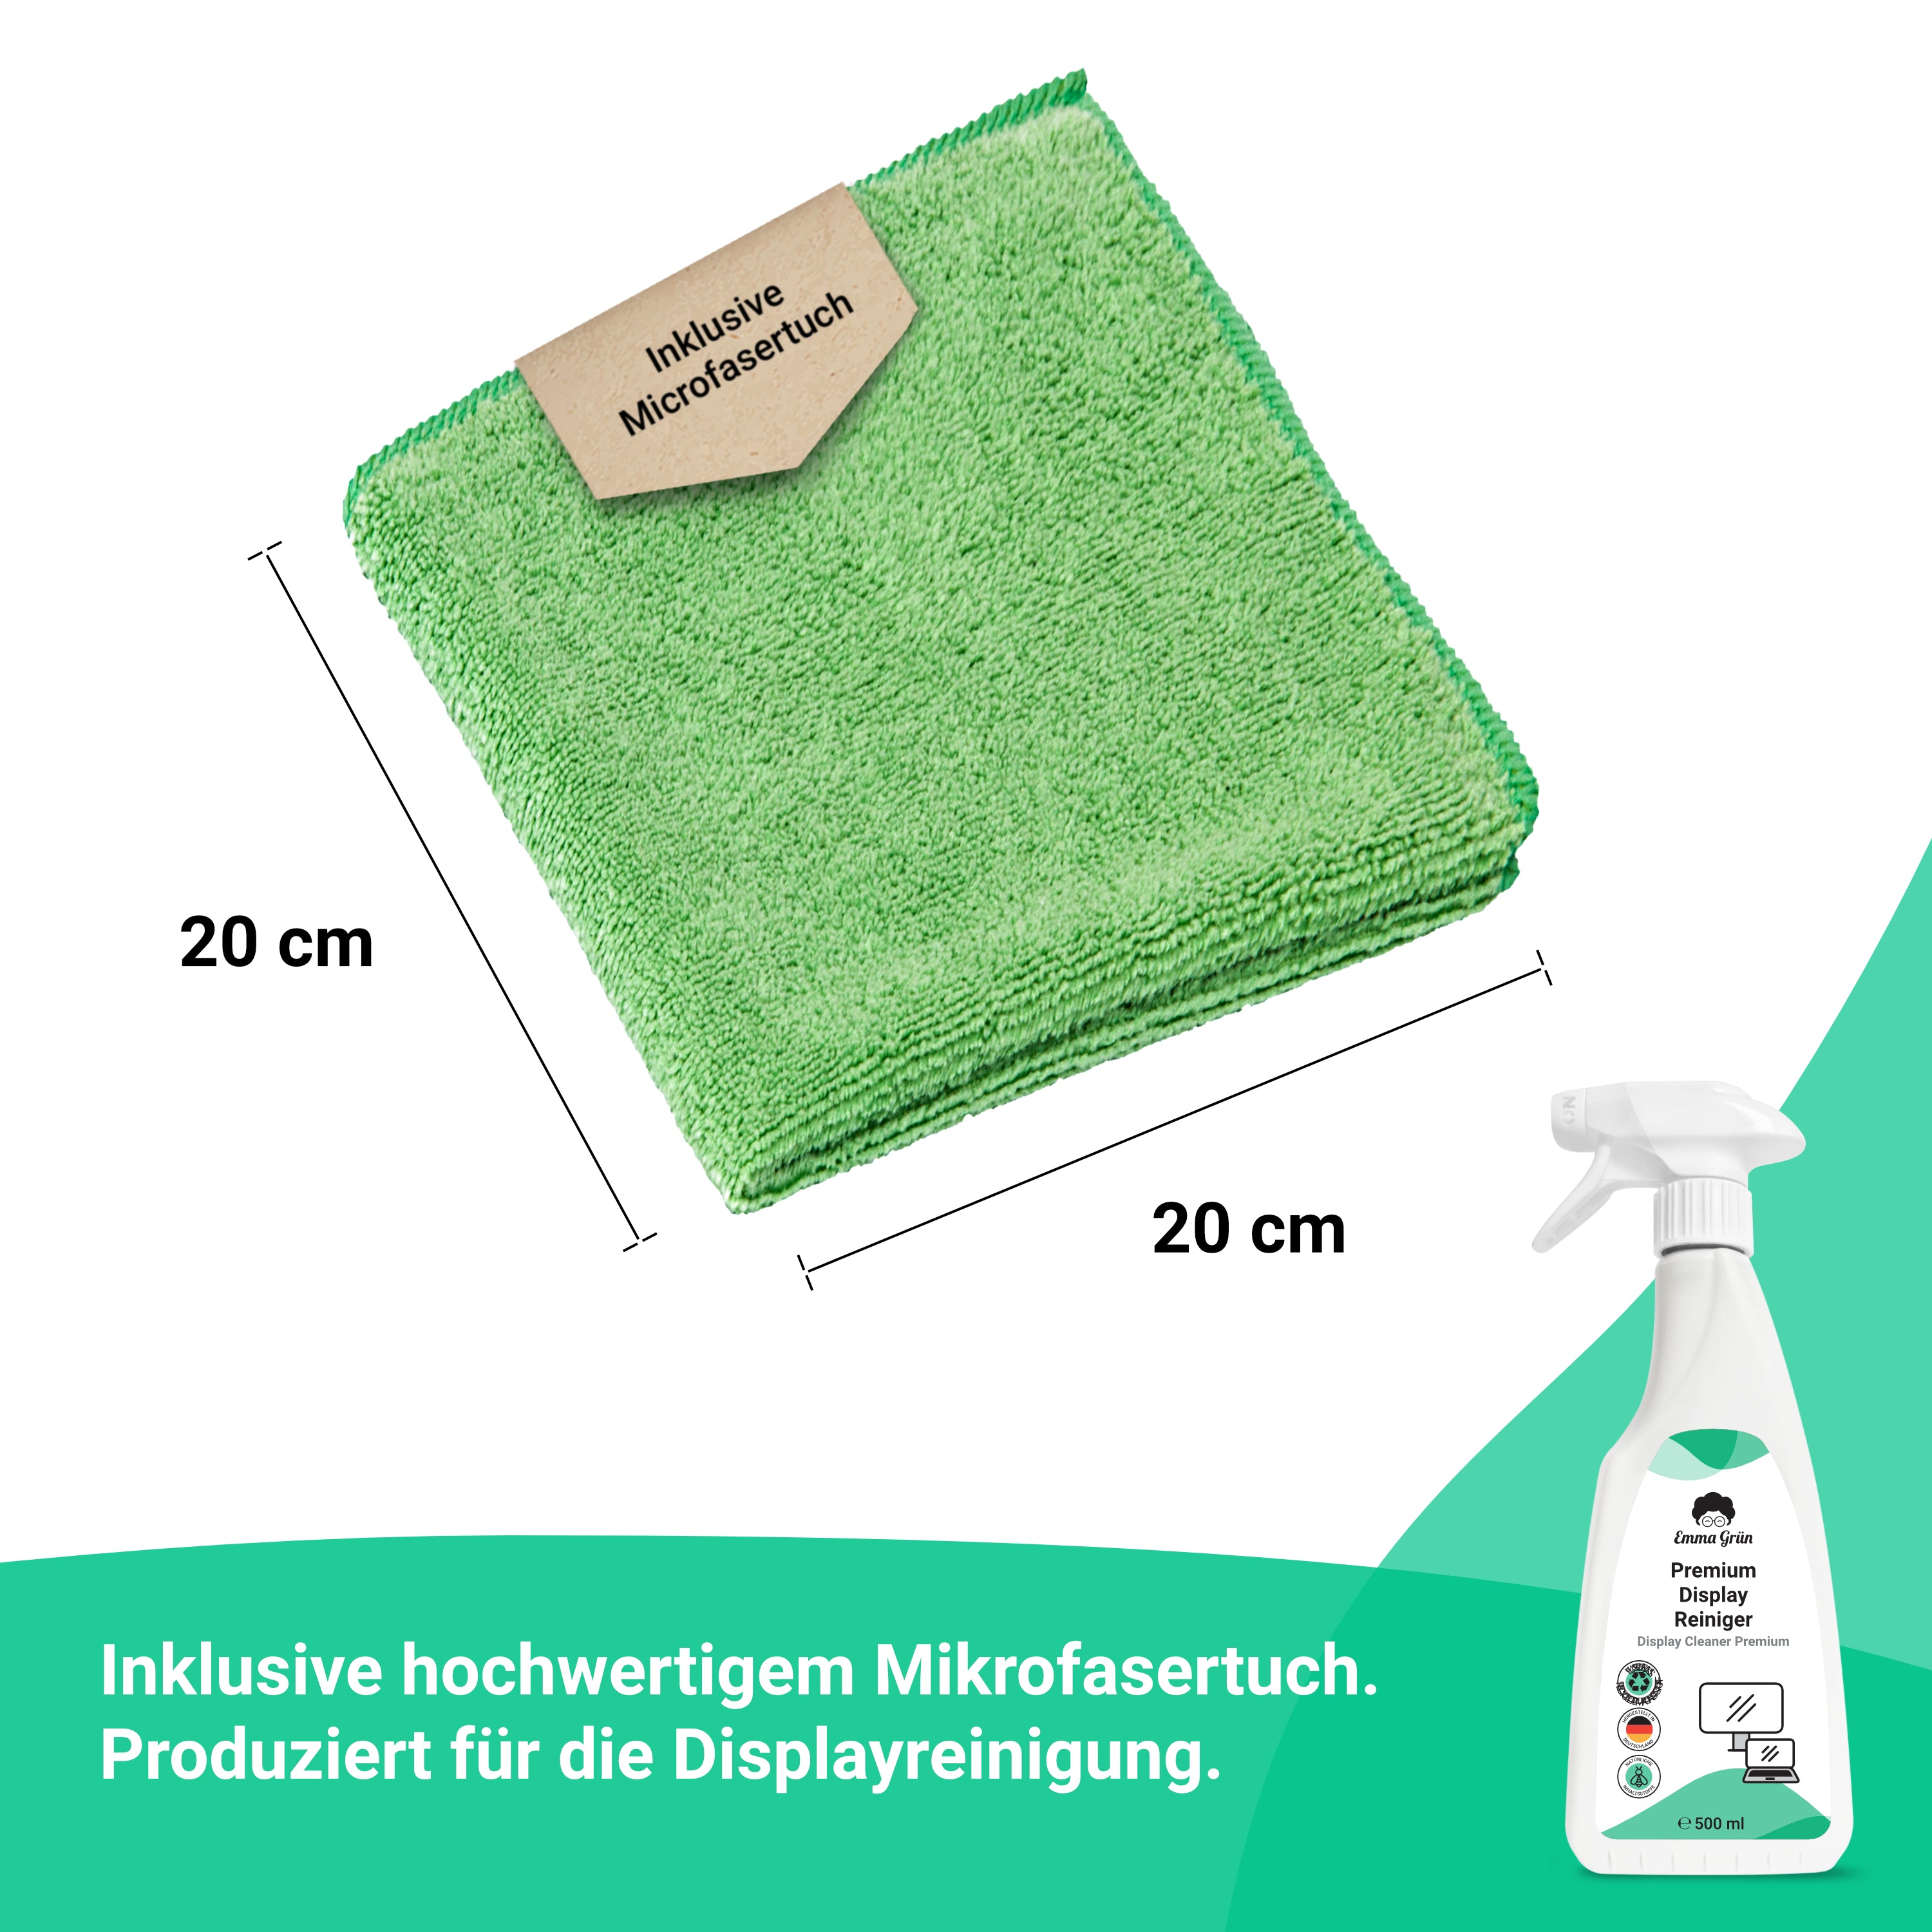 Screen cleaner 500 ml with microfiber cloth, natural cleaner for touchscreens